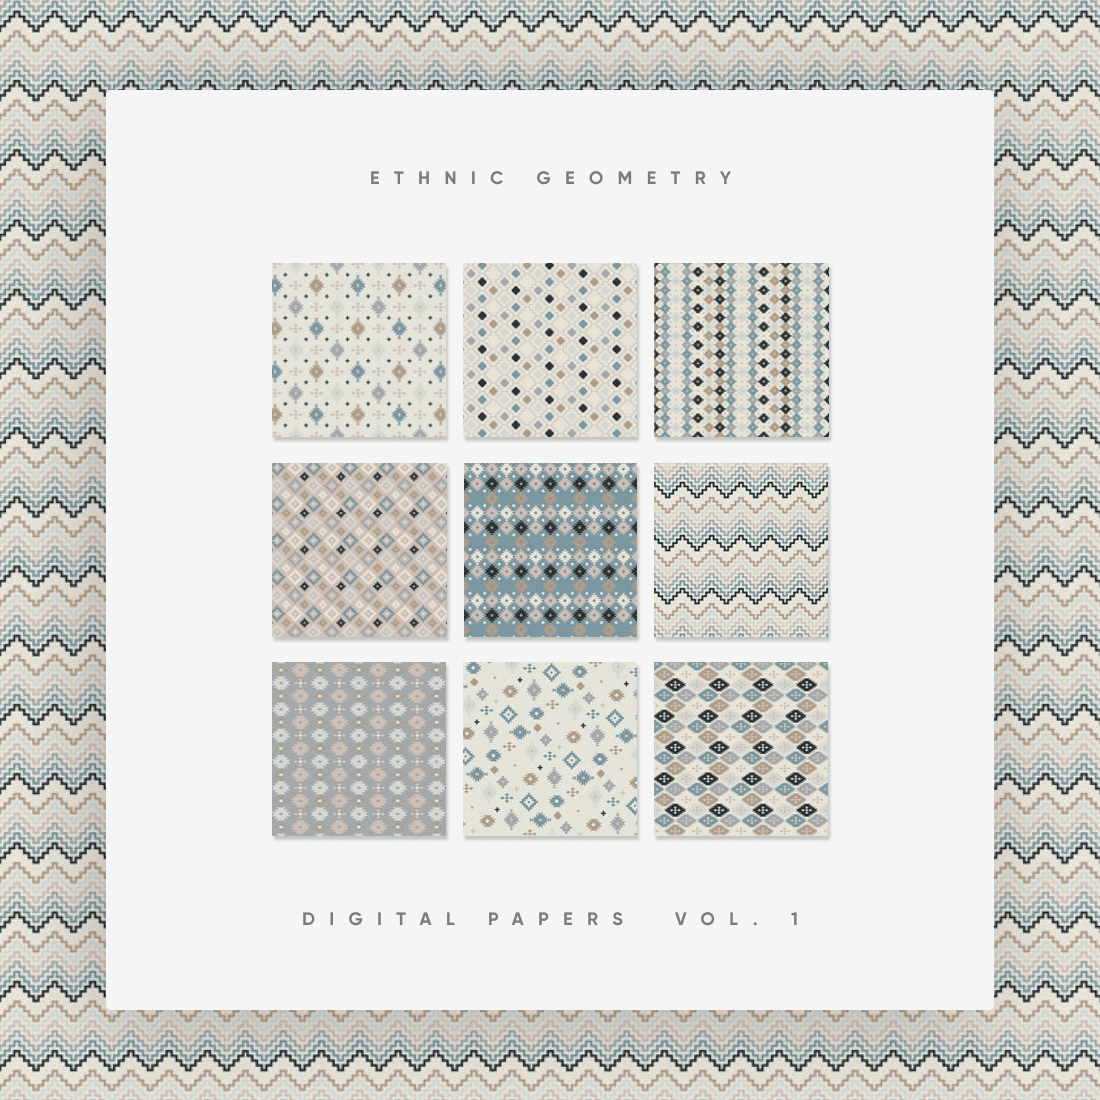 Ethnic Geometry Vol. 1 Digital Papers cover.